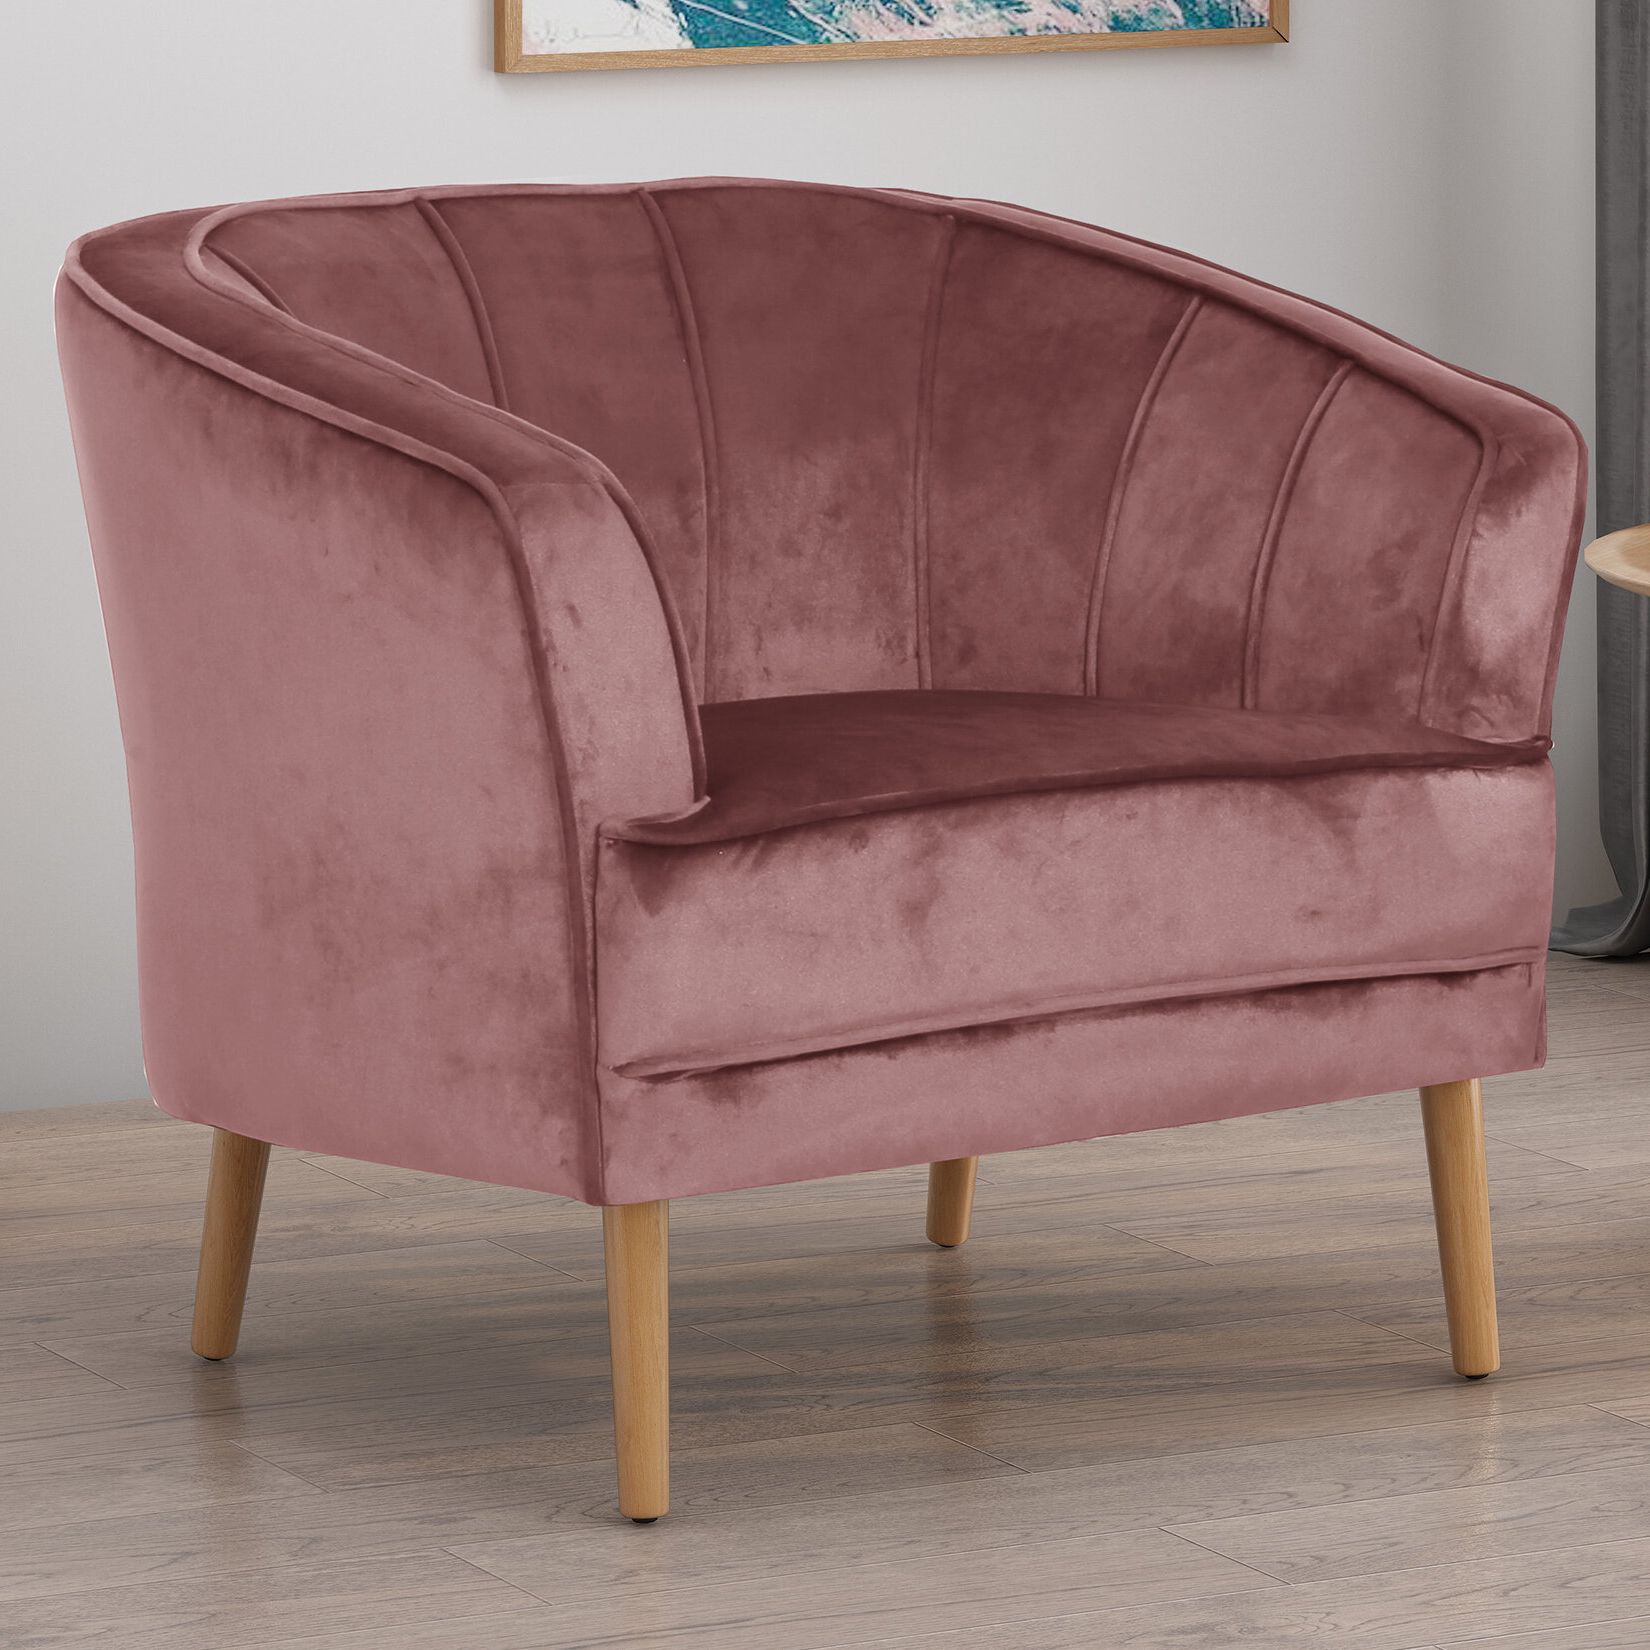 Antonia Velvet Barrel Chair Within Widely Used Indianola Modern Barrel Chairs (View 16 of 20)